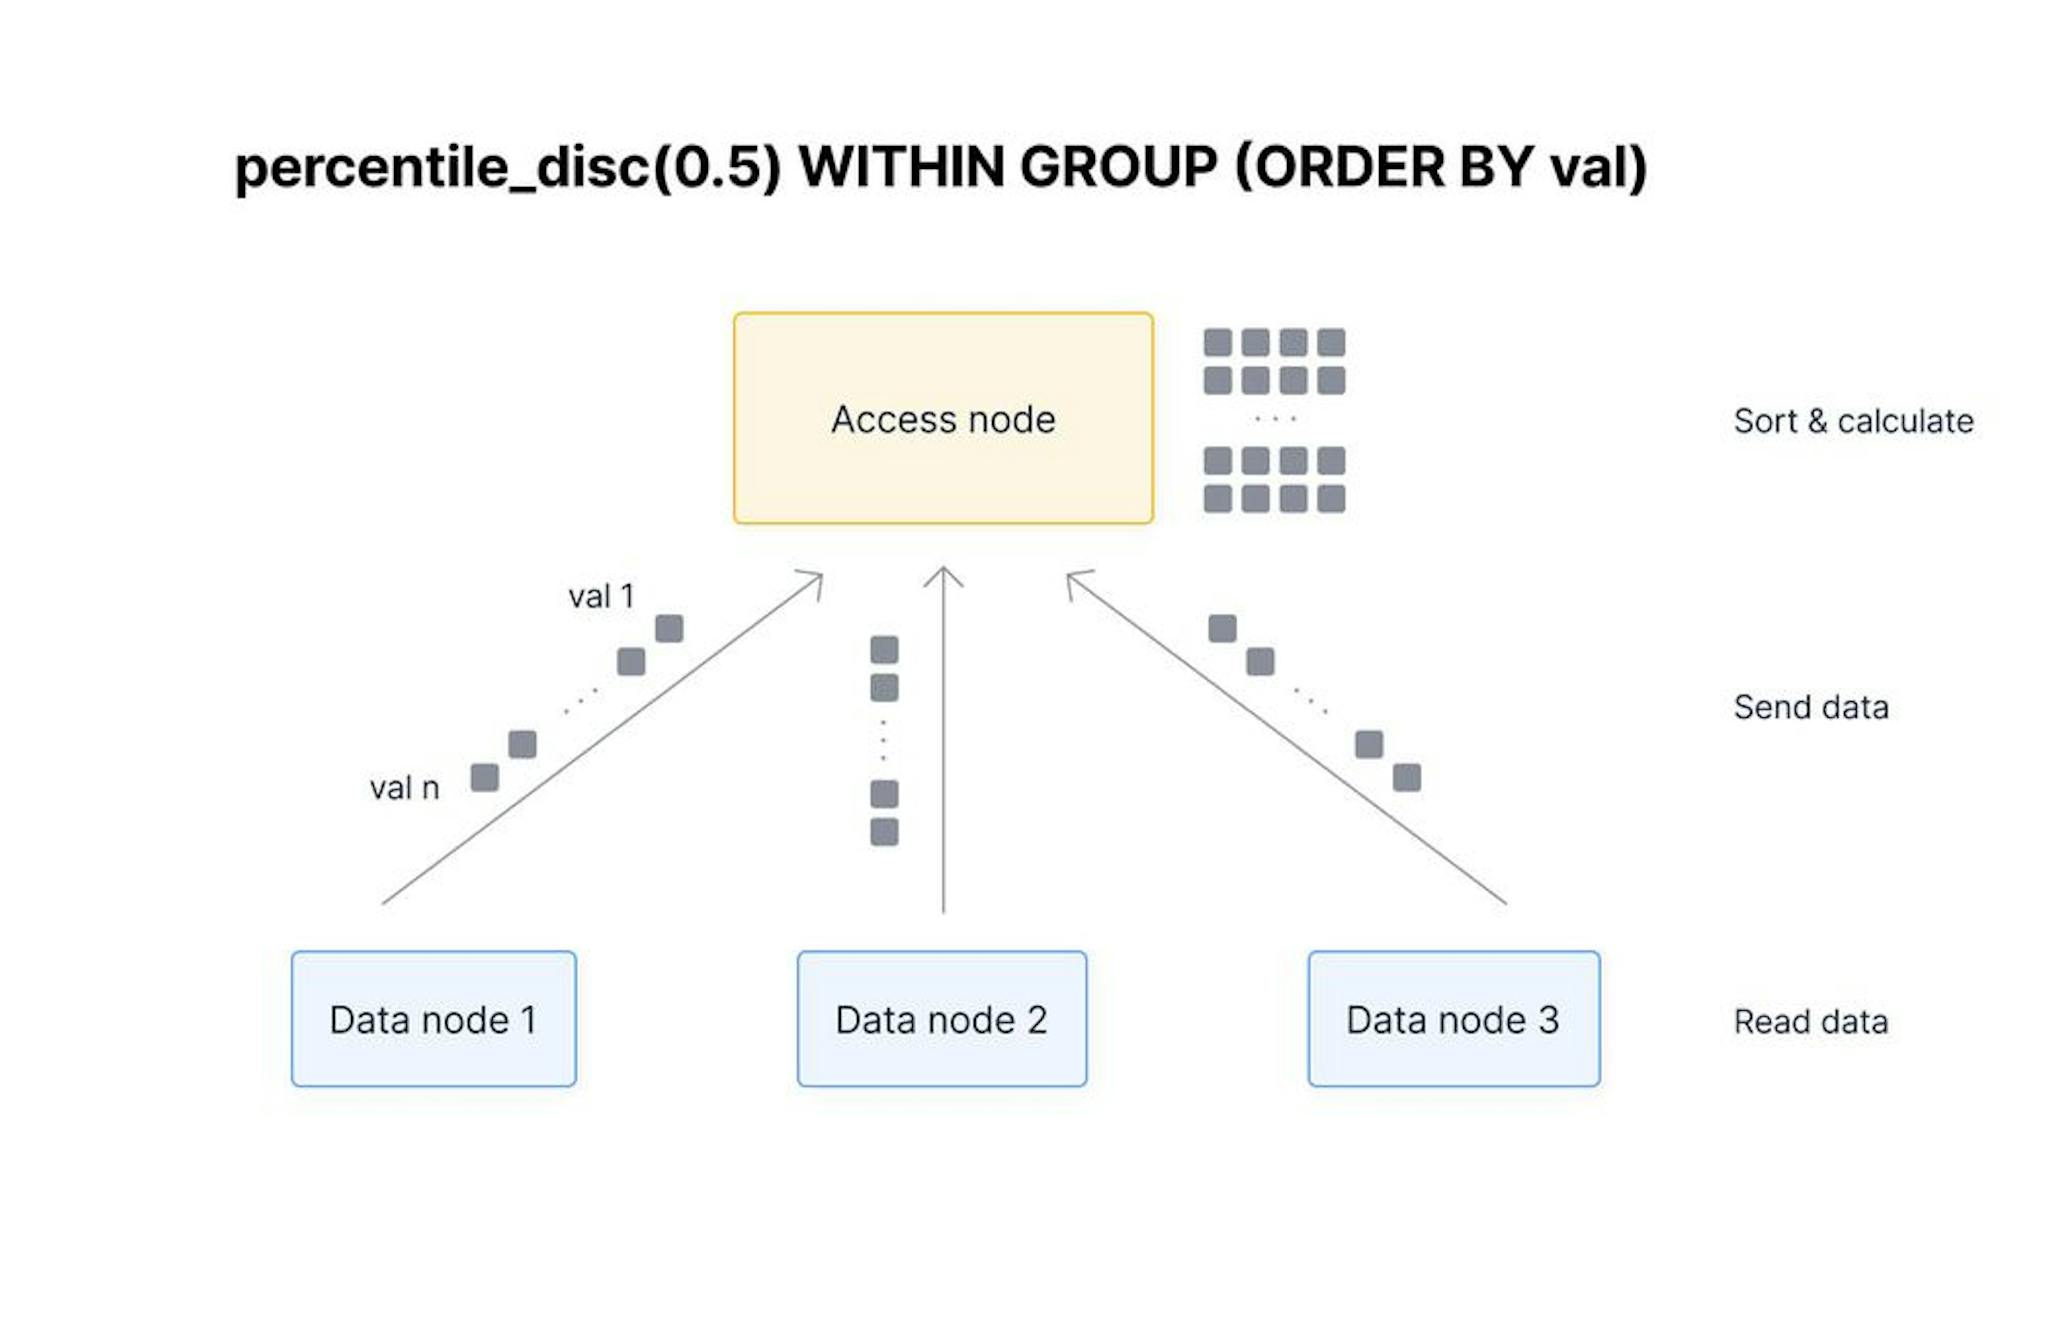 When calculating the exact percentile in TimescaleDB multi-node, each data node must send all of the data back to the access node. The access node then sorts and calculates the percentile. 